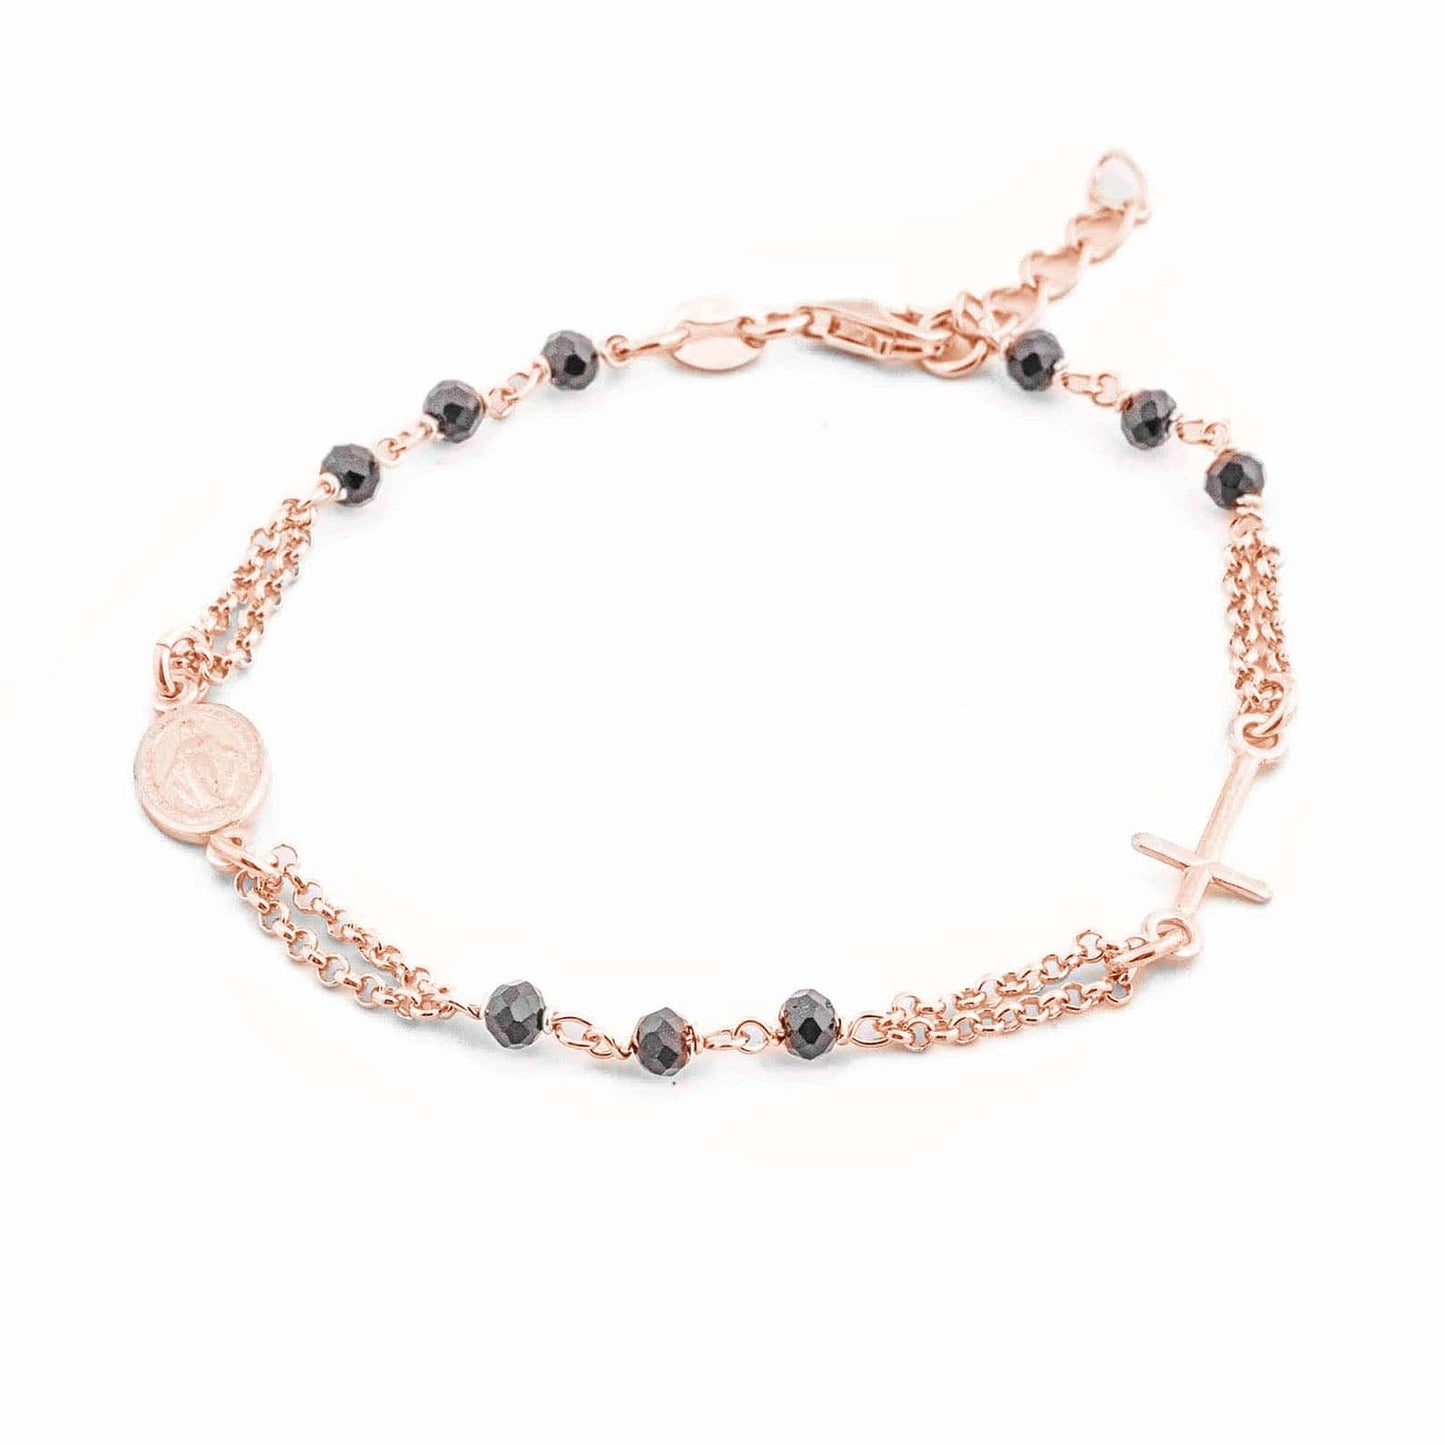 MONDO CATTOLICO Prayer Beads Rose Gold / Cm 17.5 (6.9 in) / Cm 3 (1.2 in) STERLING SILVER ROSARY BRACELET DOUBLE CHAIN BLACK FACETED BEADS